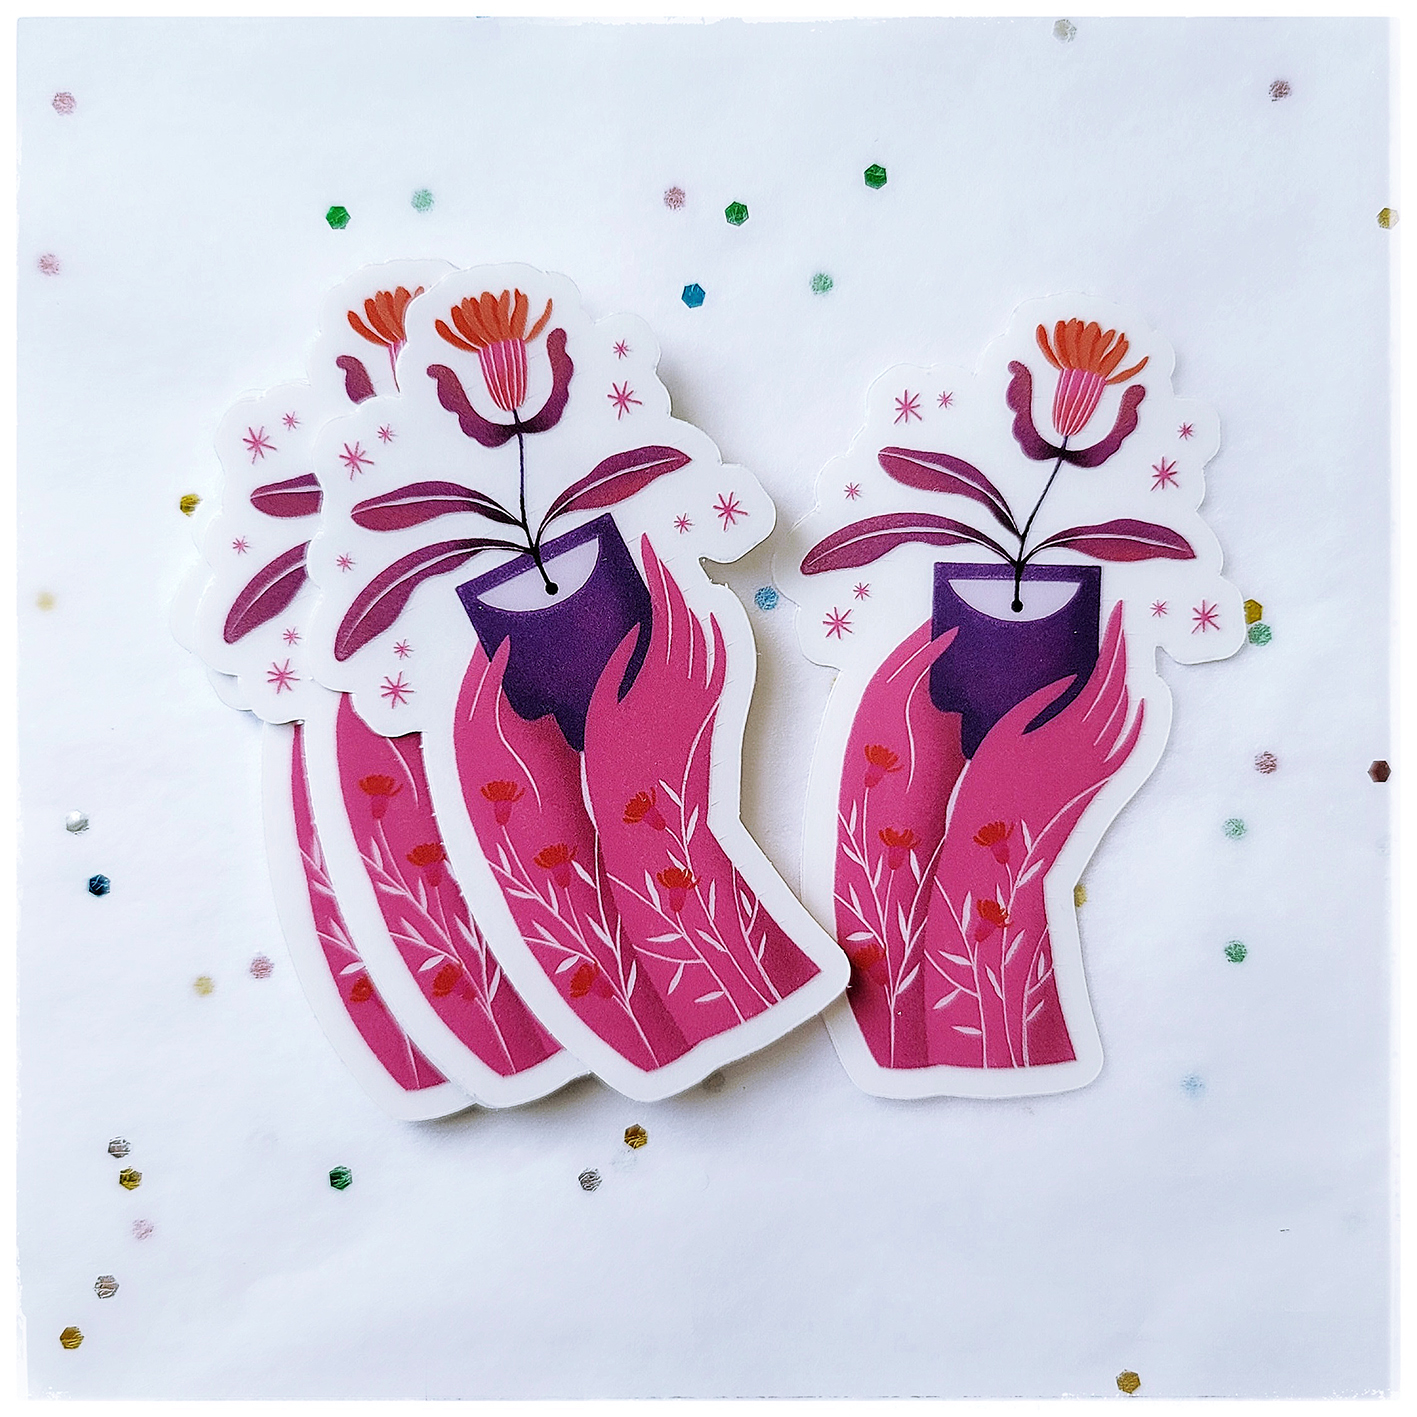 Clear vinyl sticker that showing two pink hands that are offering a red flower in a lovely manner. Both hands are covered with white and red tiny flowers. This sticker is water and weather proof.